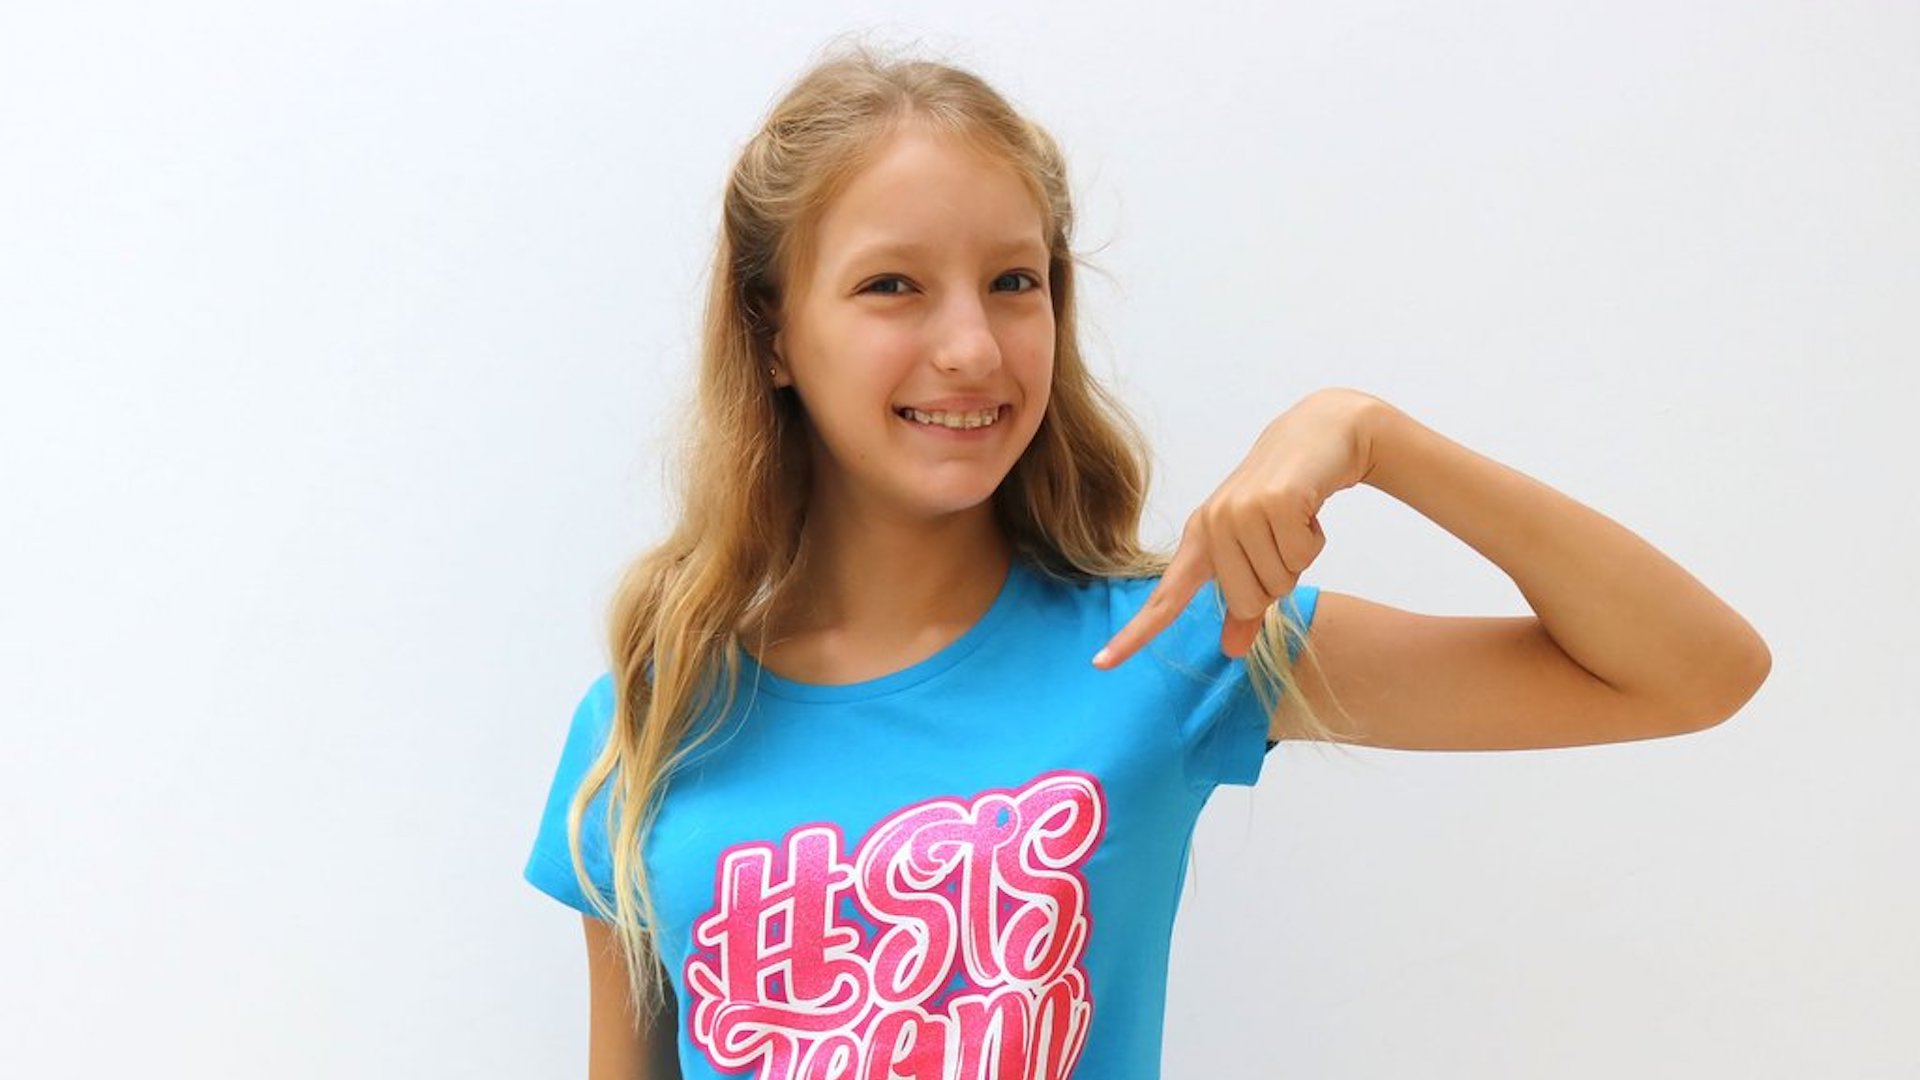 Sis with her #TEAMSIS t-shirt